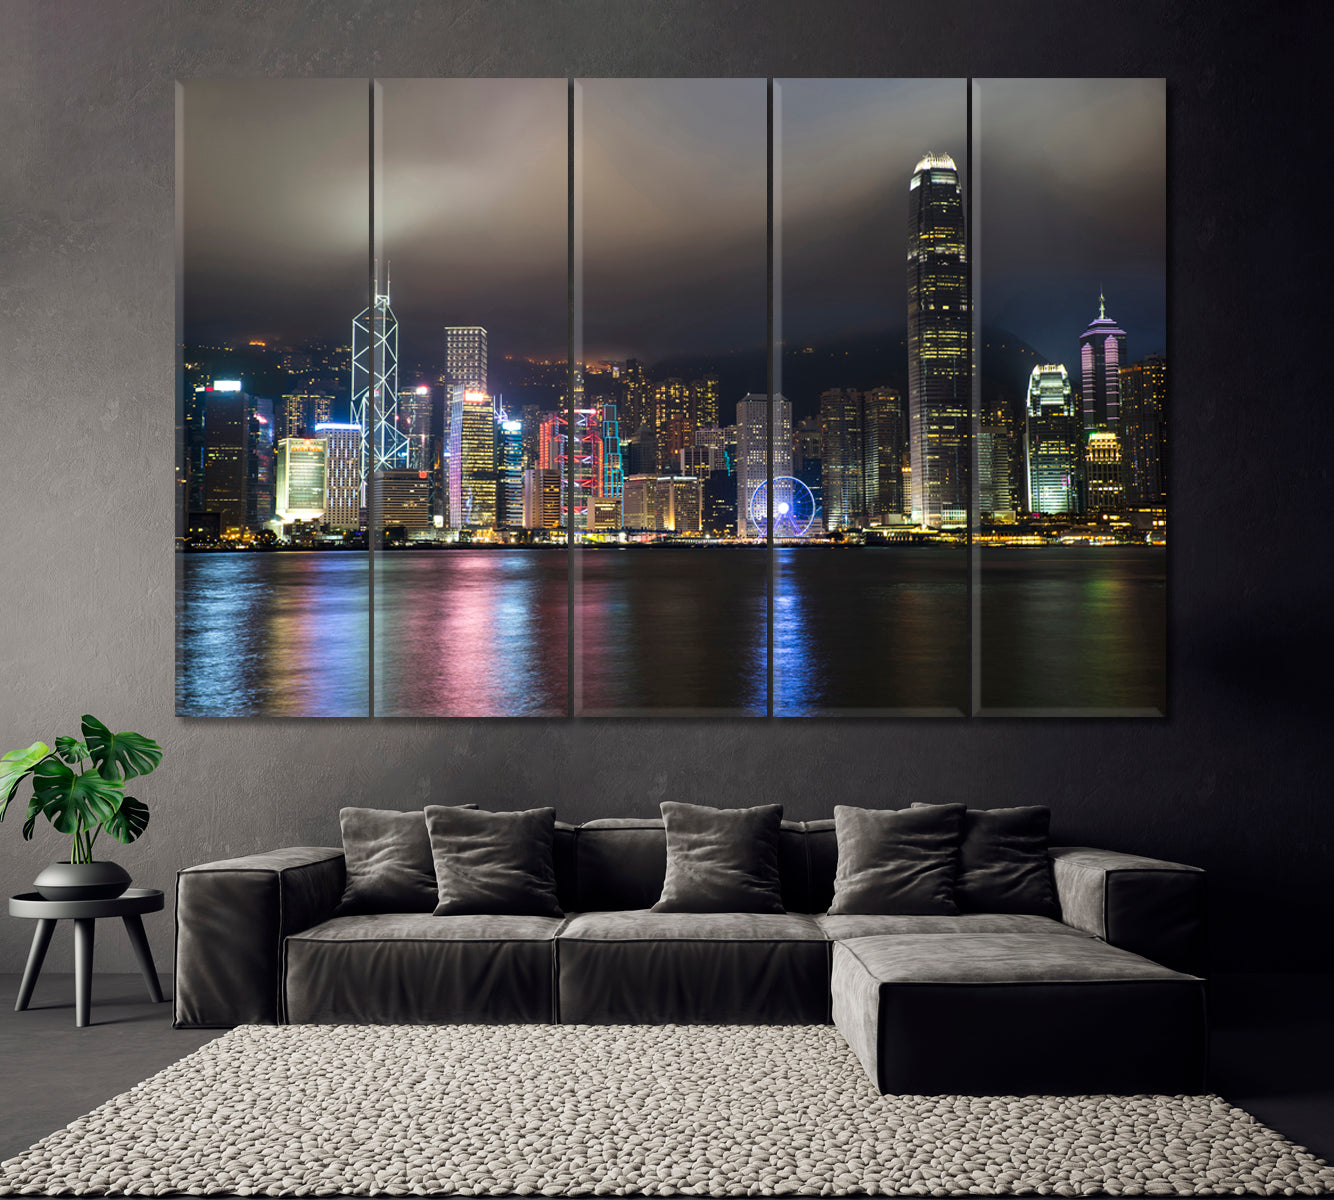 Hong Kong Victoria Harbour at Night Canvas Print ArtLexy 5 Panels 36"x24" inches 